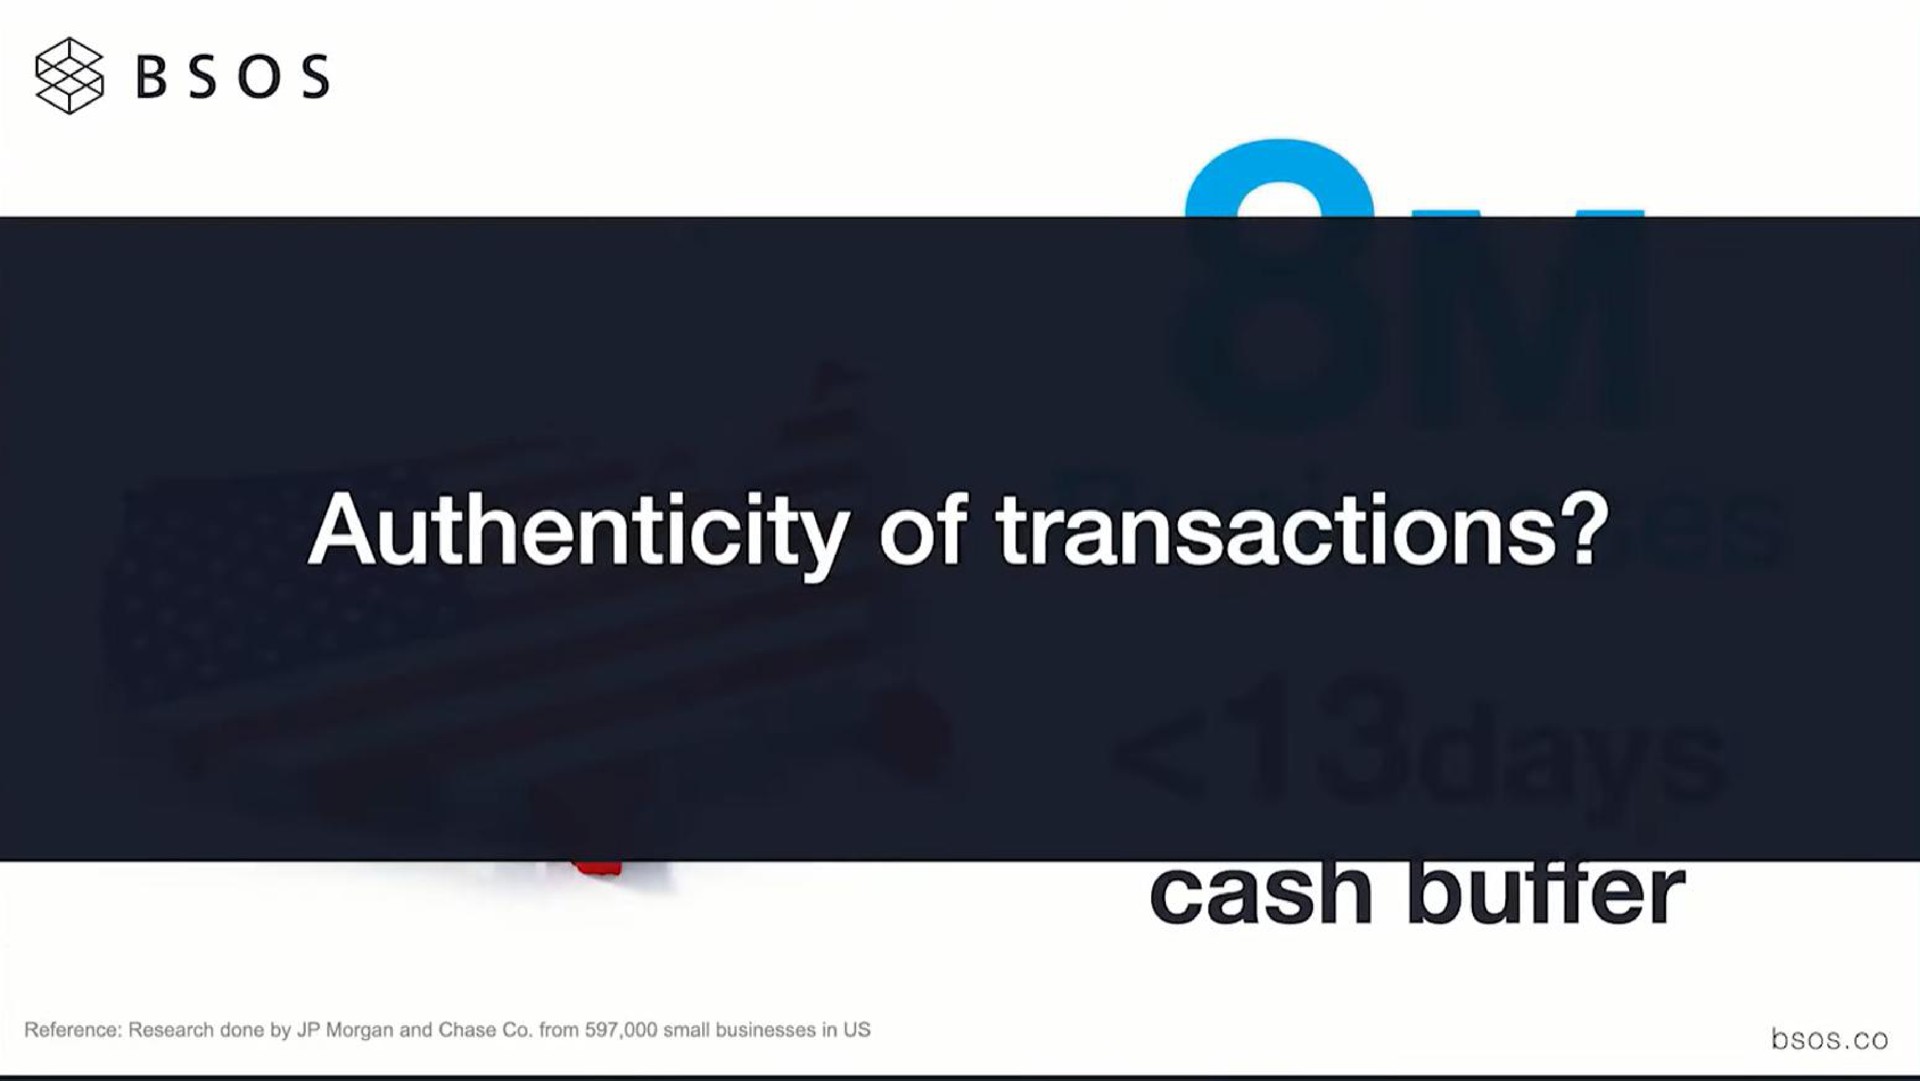 authenticity of transactions | Bsos